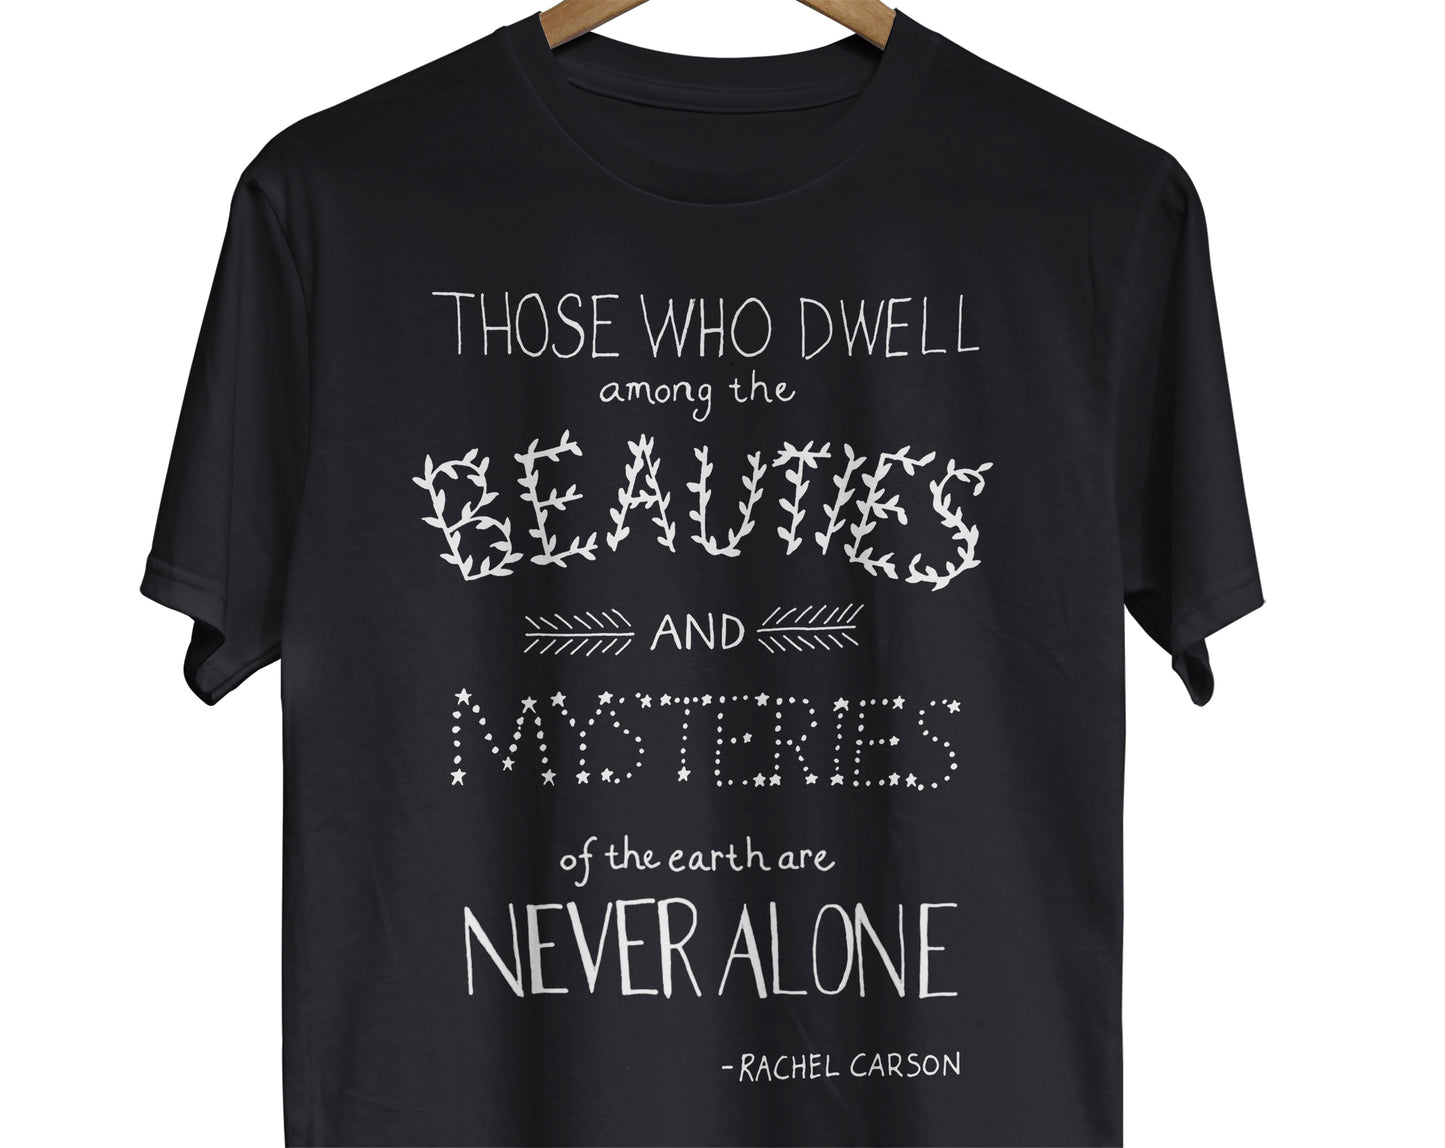 A t-shirt featuring a hand-lettered quote by Rachel Carson. The quote reads, "Those who dwell among the beauties and mysteries of the earth are never alone."